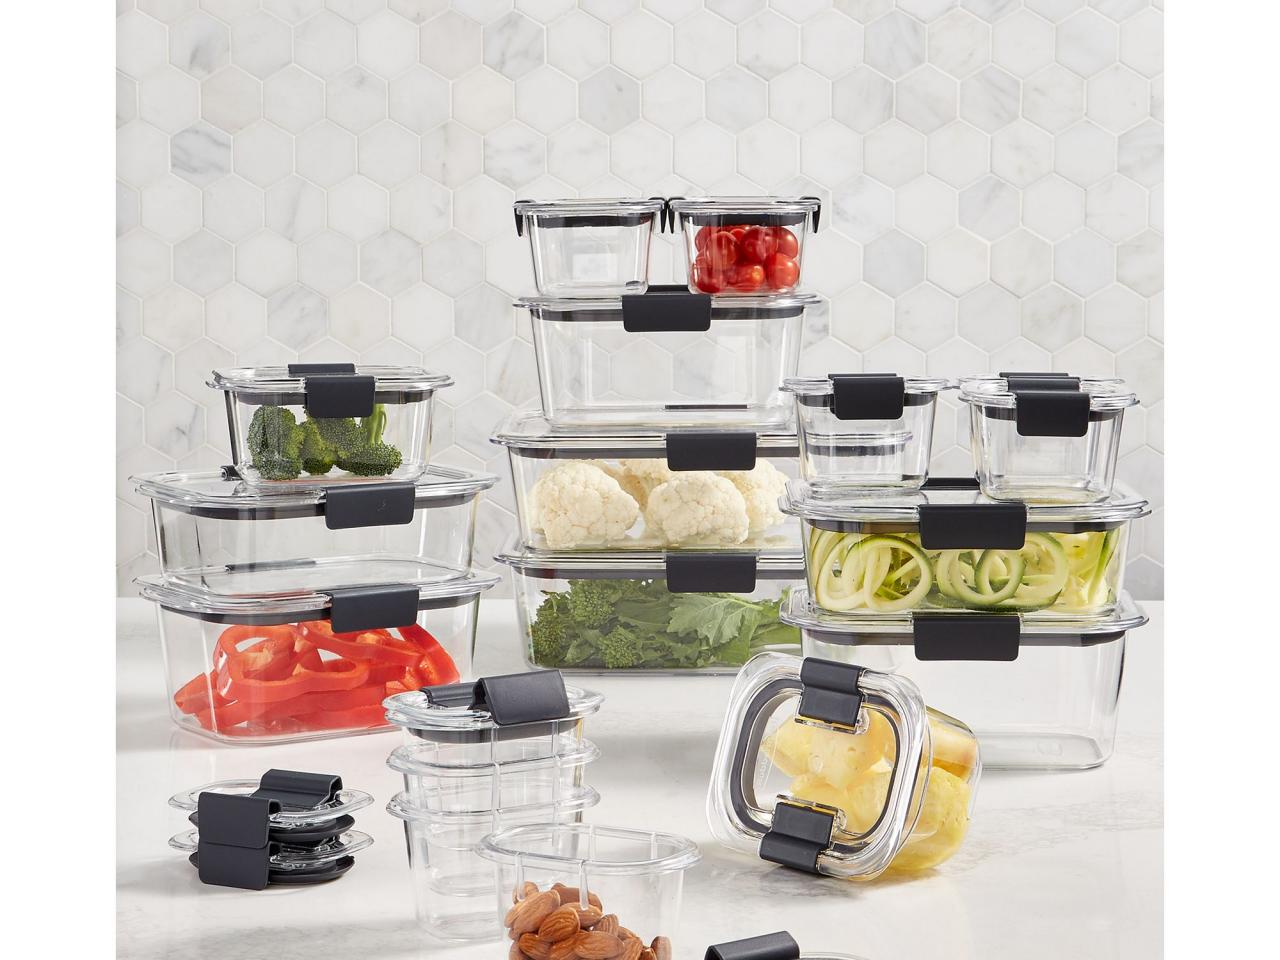 https://food.fnr.sndimg.com/content/dam/images/food/products/2019/8/23/rx_rubbermaid-brilliance-36-piece-container-set.jpeg.rend.hgtvcom.1280.960.suffix/1566584612353.jpeg